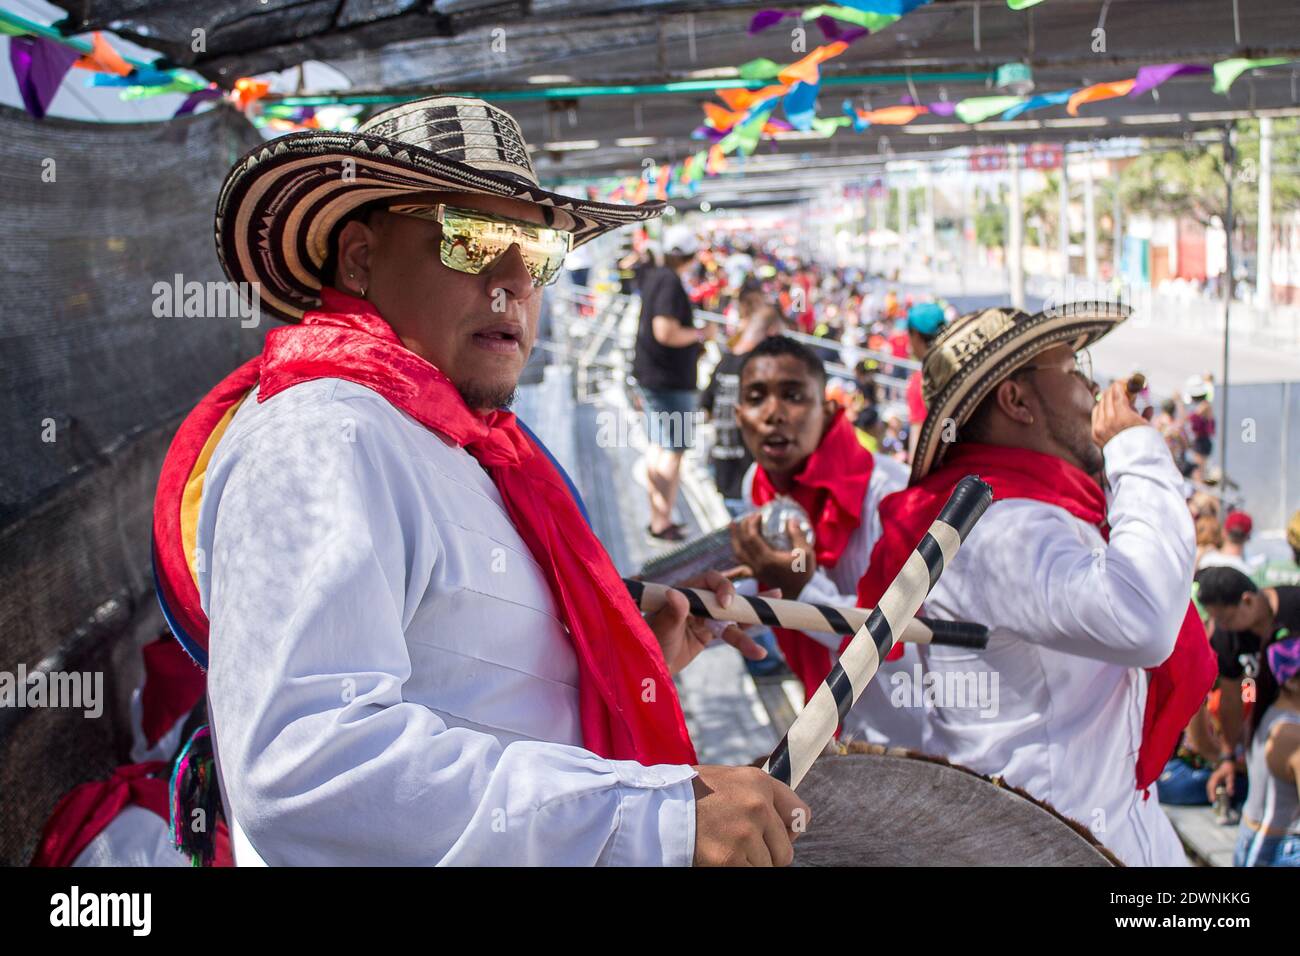 BARRANQUILLA, COLOMBIA - Dec 20, 2020: Traditional Colombian music at the Barranquilla carnival Stock Photo